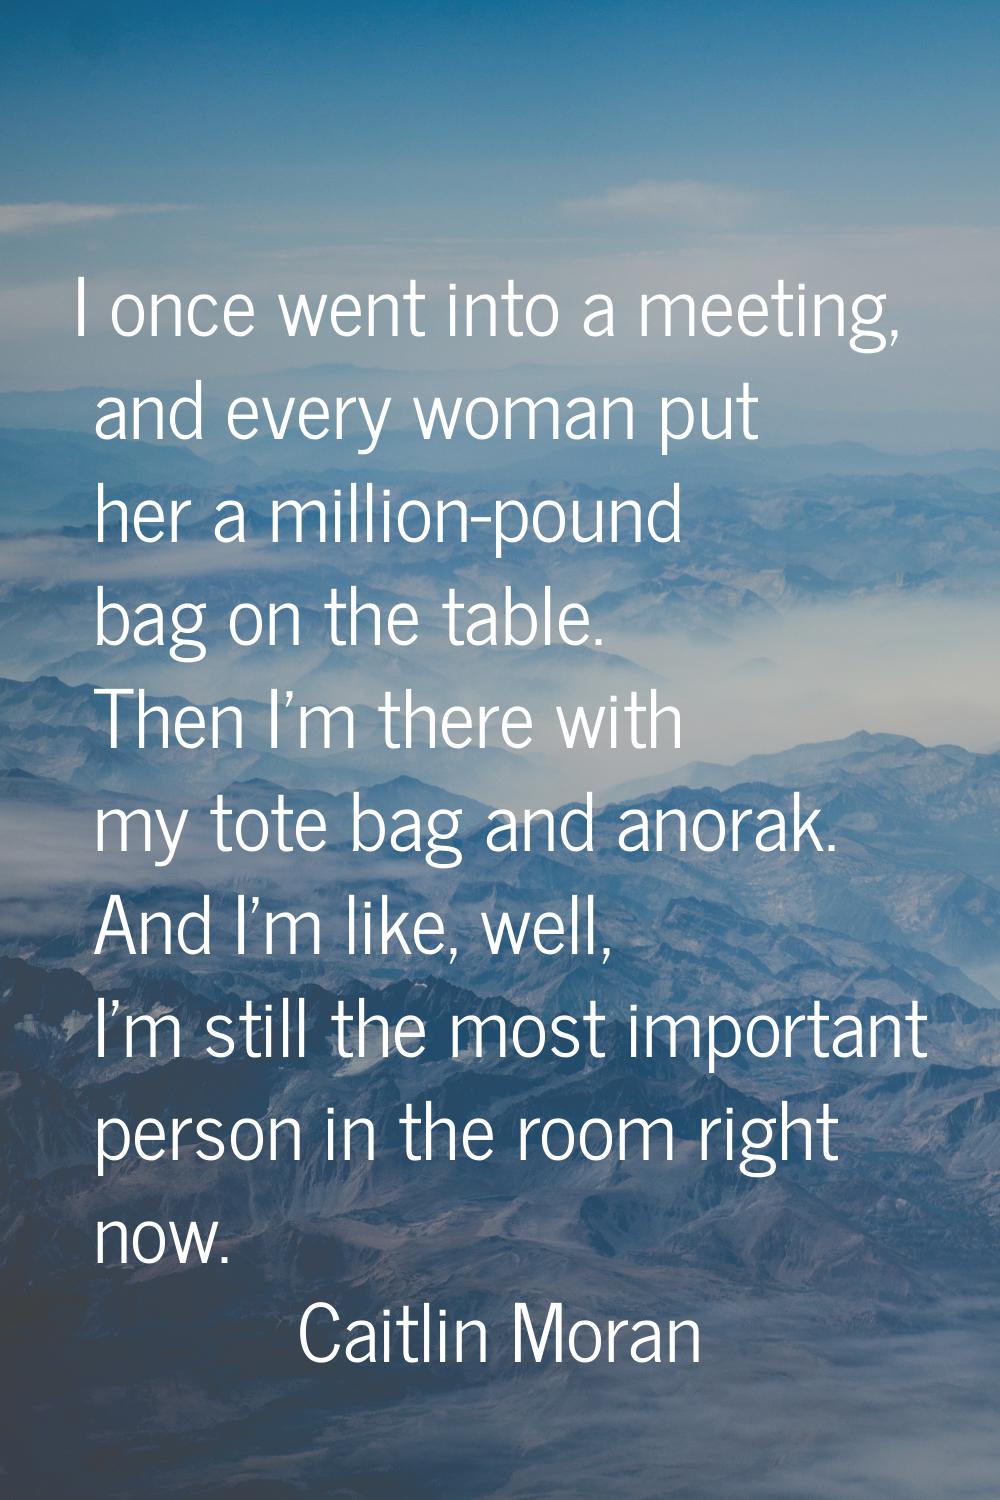 I once went into a meeting, and every woman put her a million-pound bag on the table. Then I'm ther